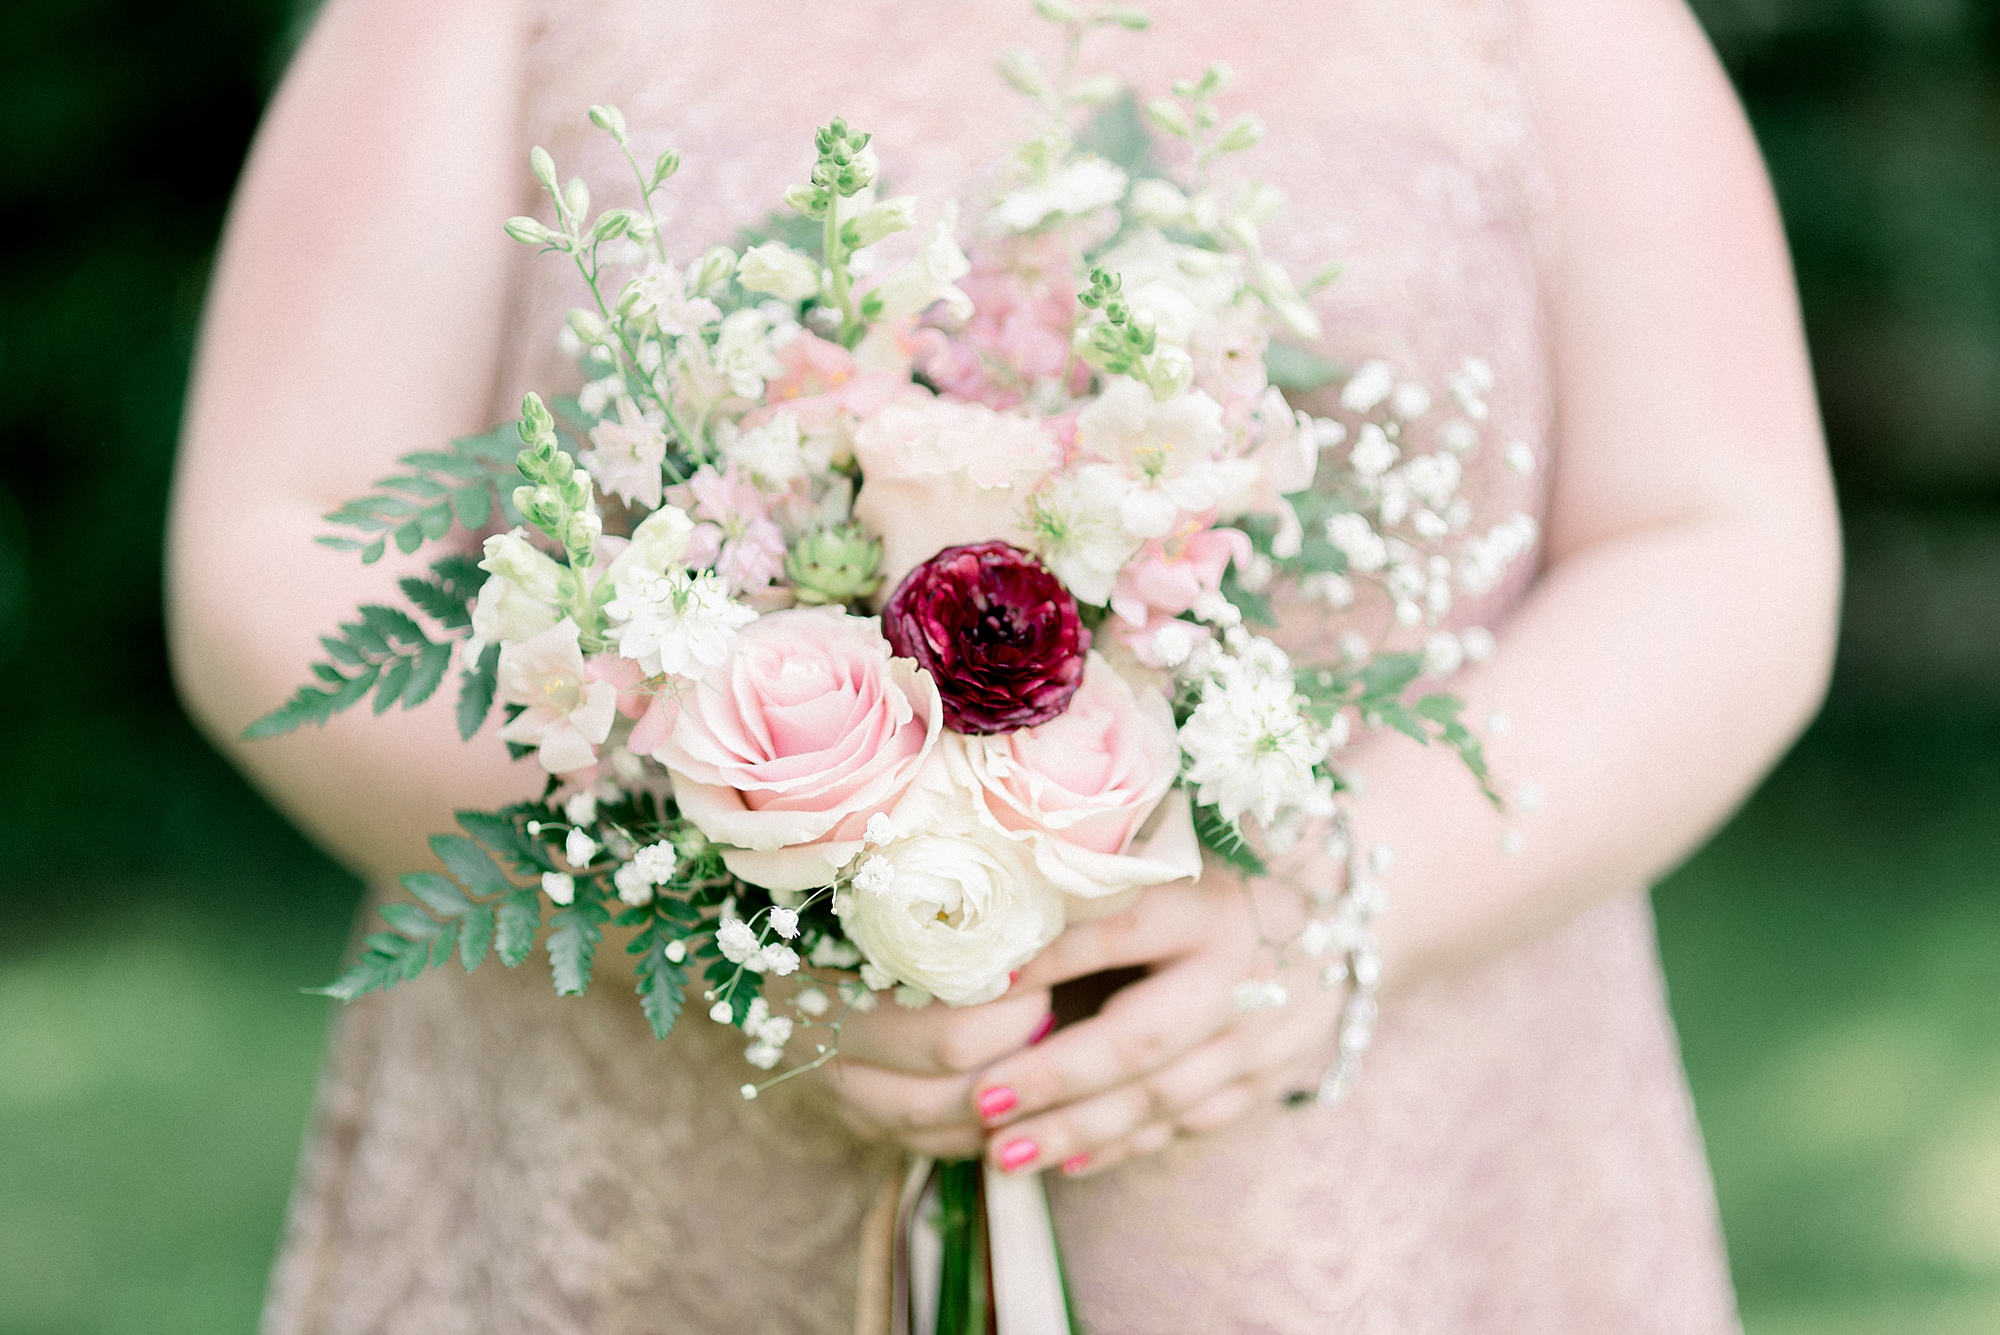 Bridal Day Details at a Garden Wedding by Dolly DeLong Photography in Nashville Tennessee